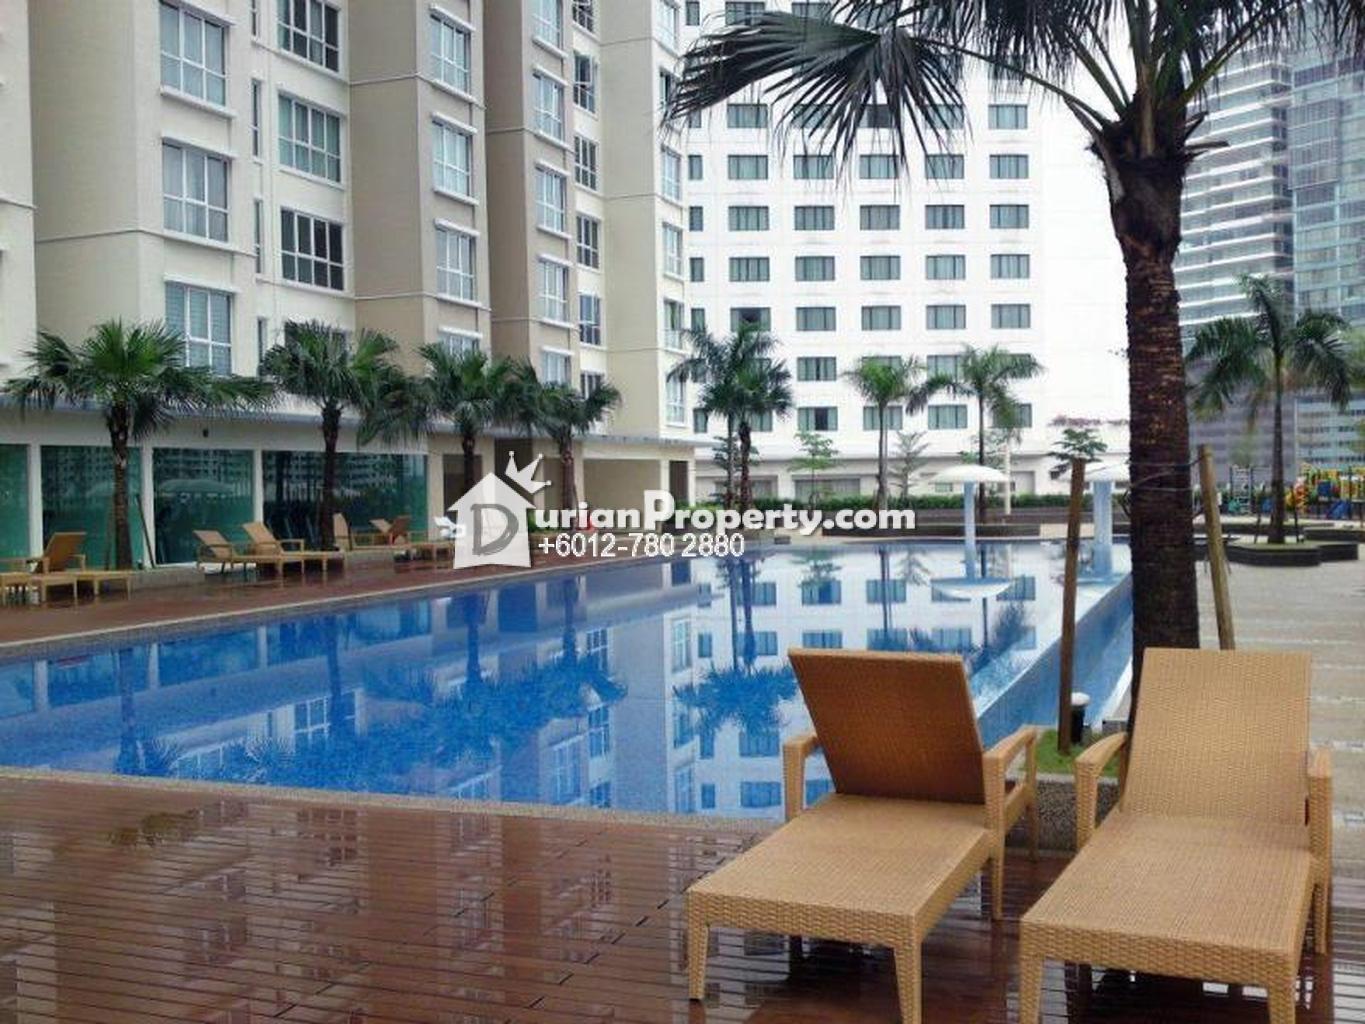 Condo For Rent At Titiwangsa Sentral Titiwangsa For Rm 2 000 By Calvinleong Durianproperty